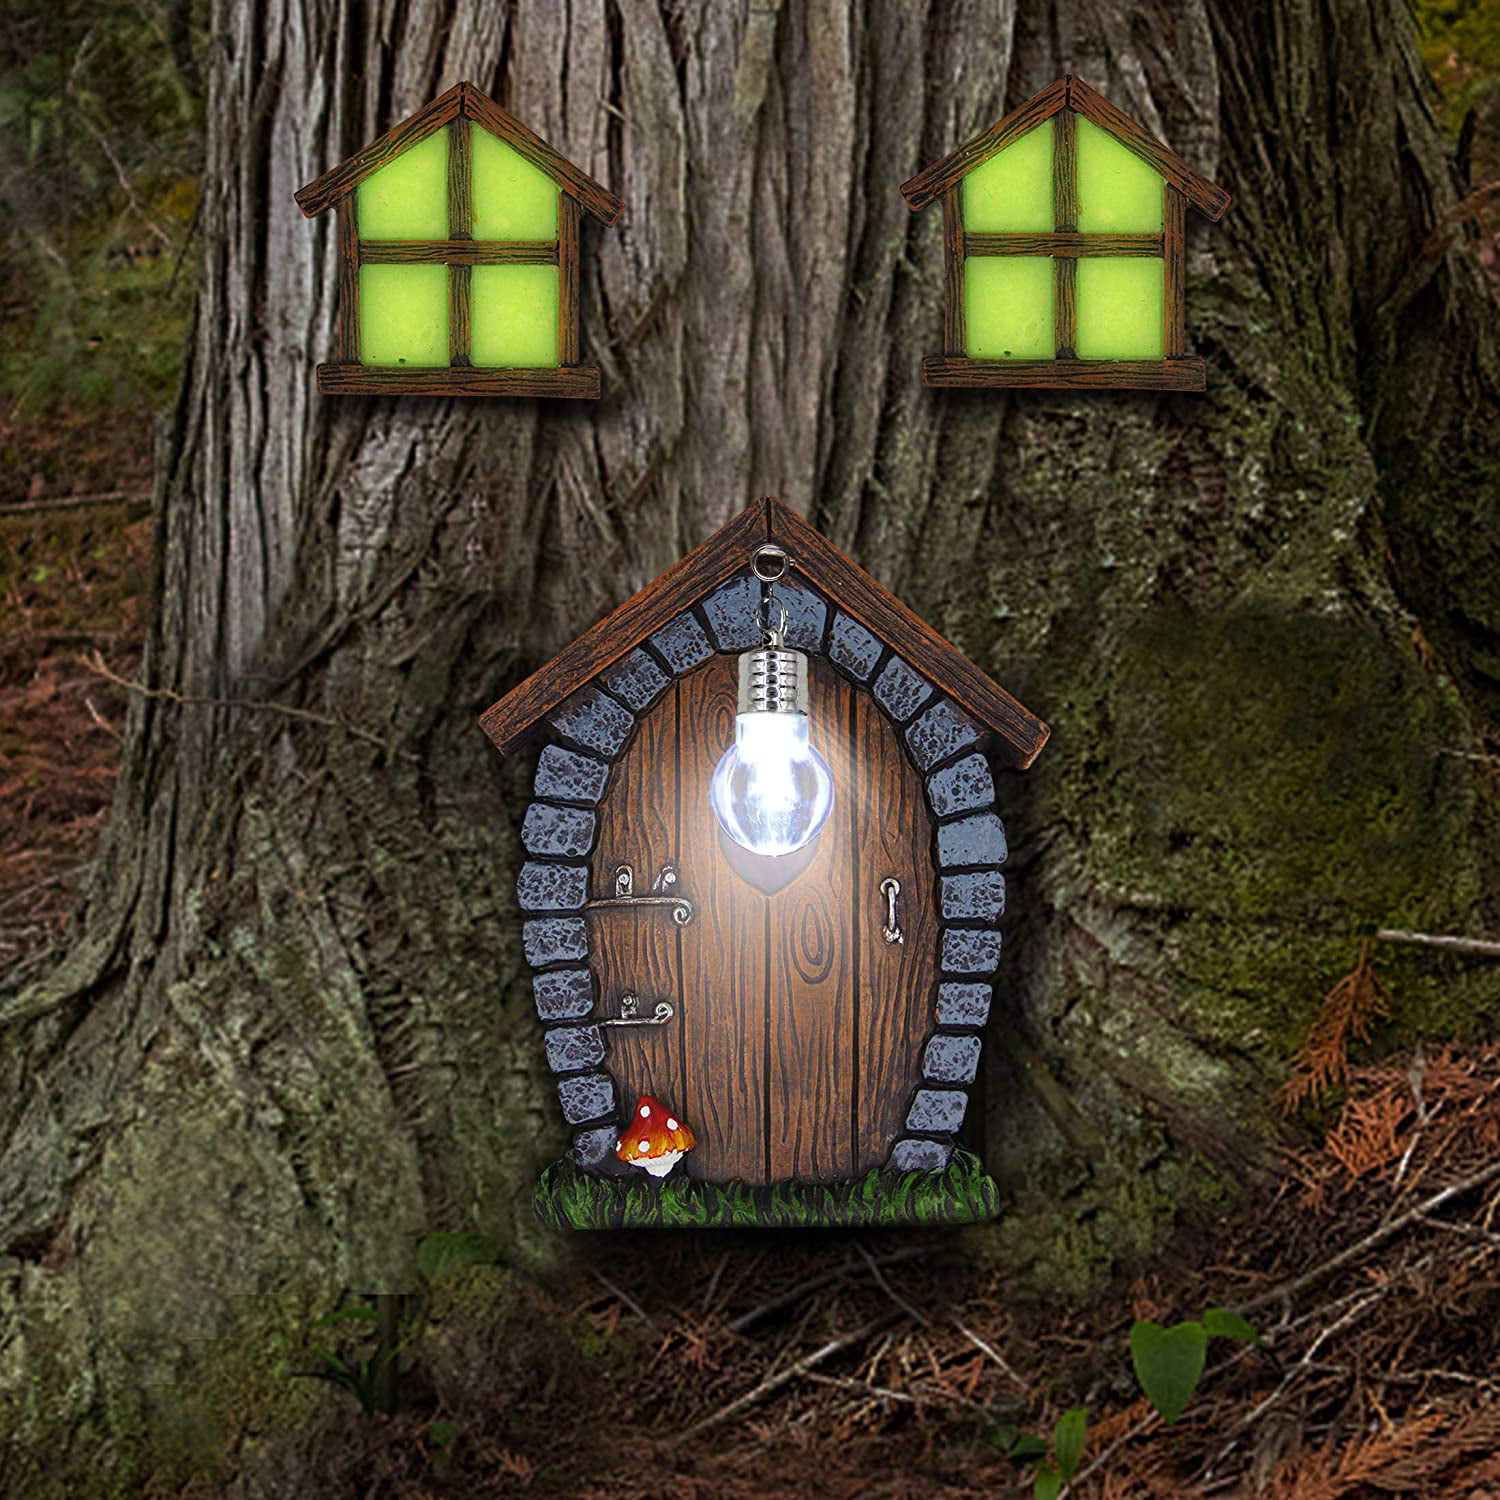 A, 1PC EDGY Fairy Garden Door Accessories Miniature Gnome Fairy House Window Doors for Trees Outdoor Tree Decoration Garden Accessories Mini Fairy Garden Sculpture Lawn Ornaments for Tree Decor 